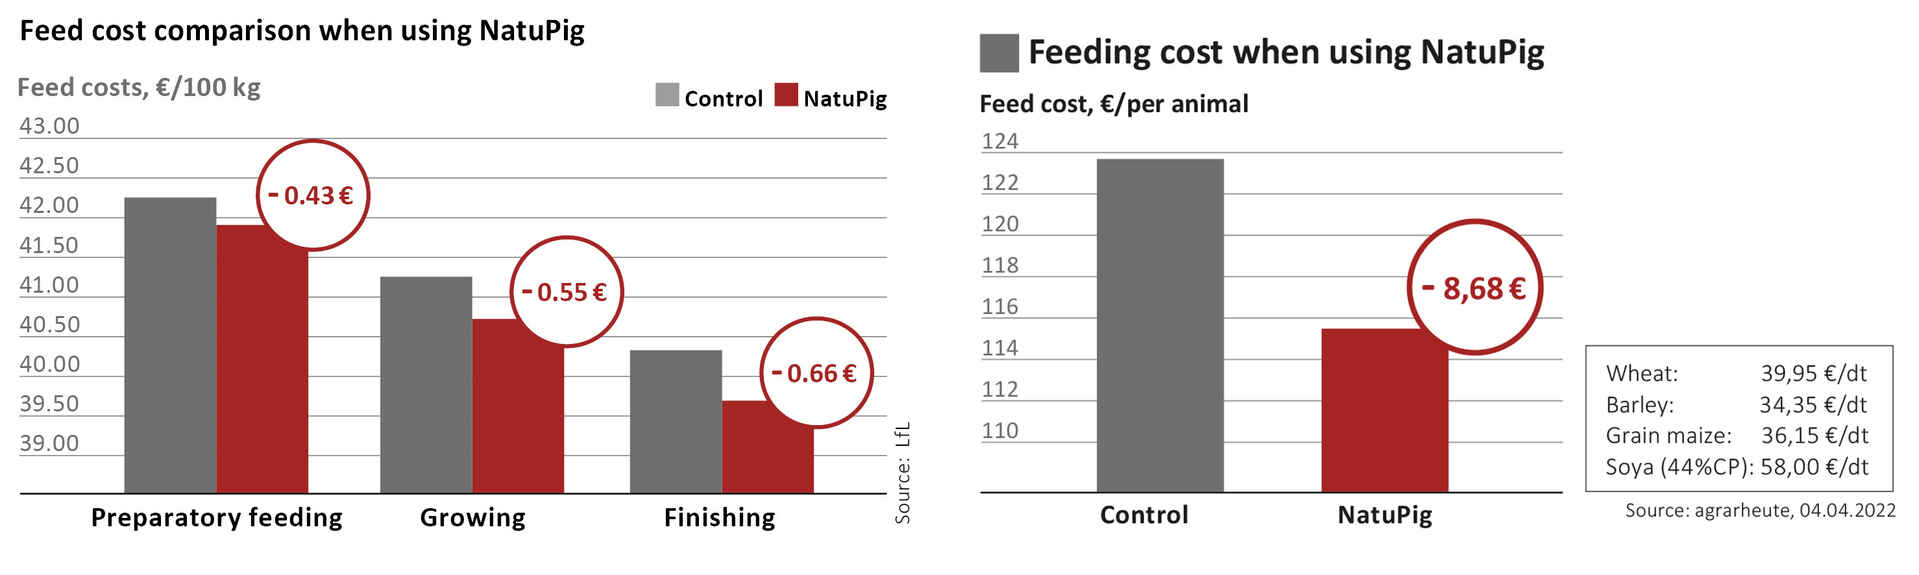 Feed cost comparison when using NatuPig